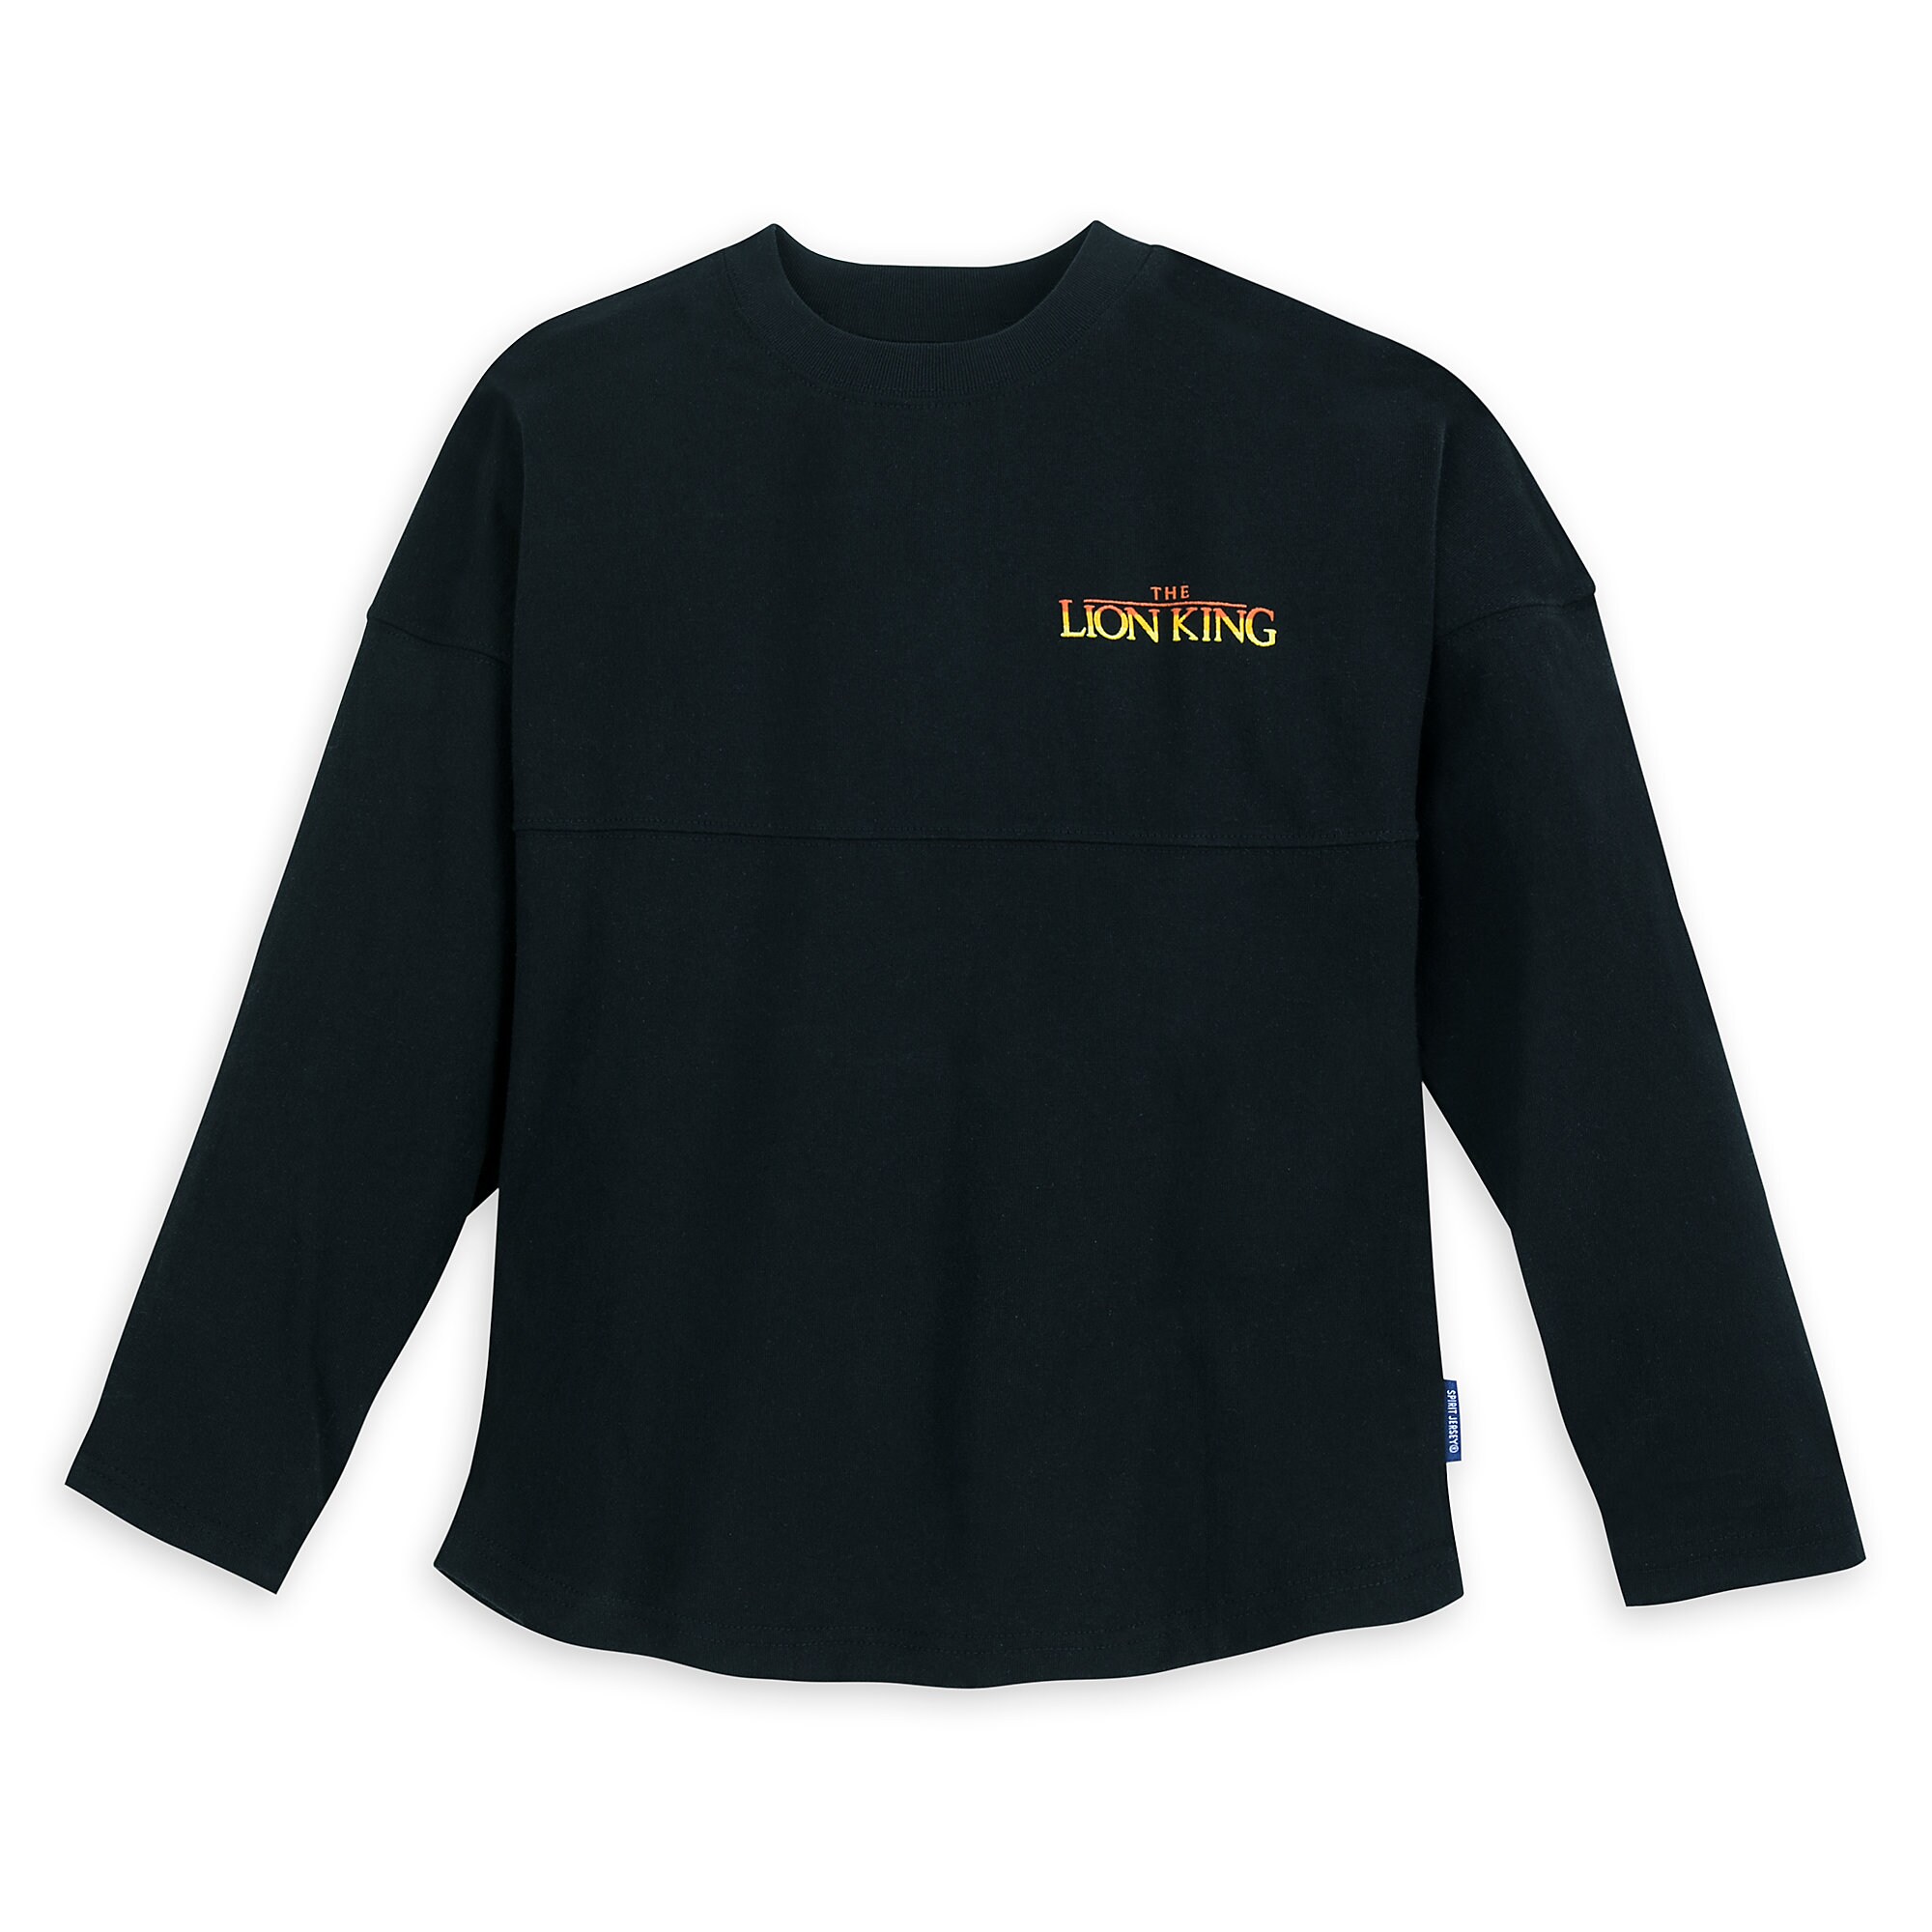 The Lion King Spirit Jersey for Kids